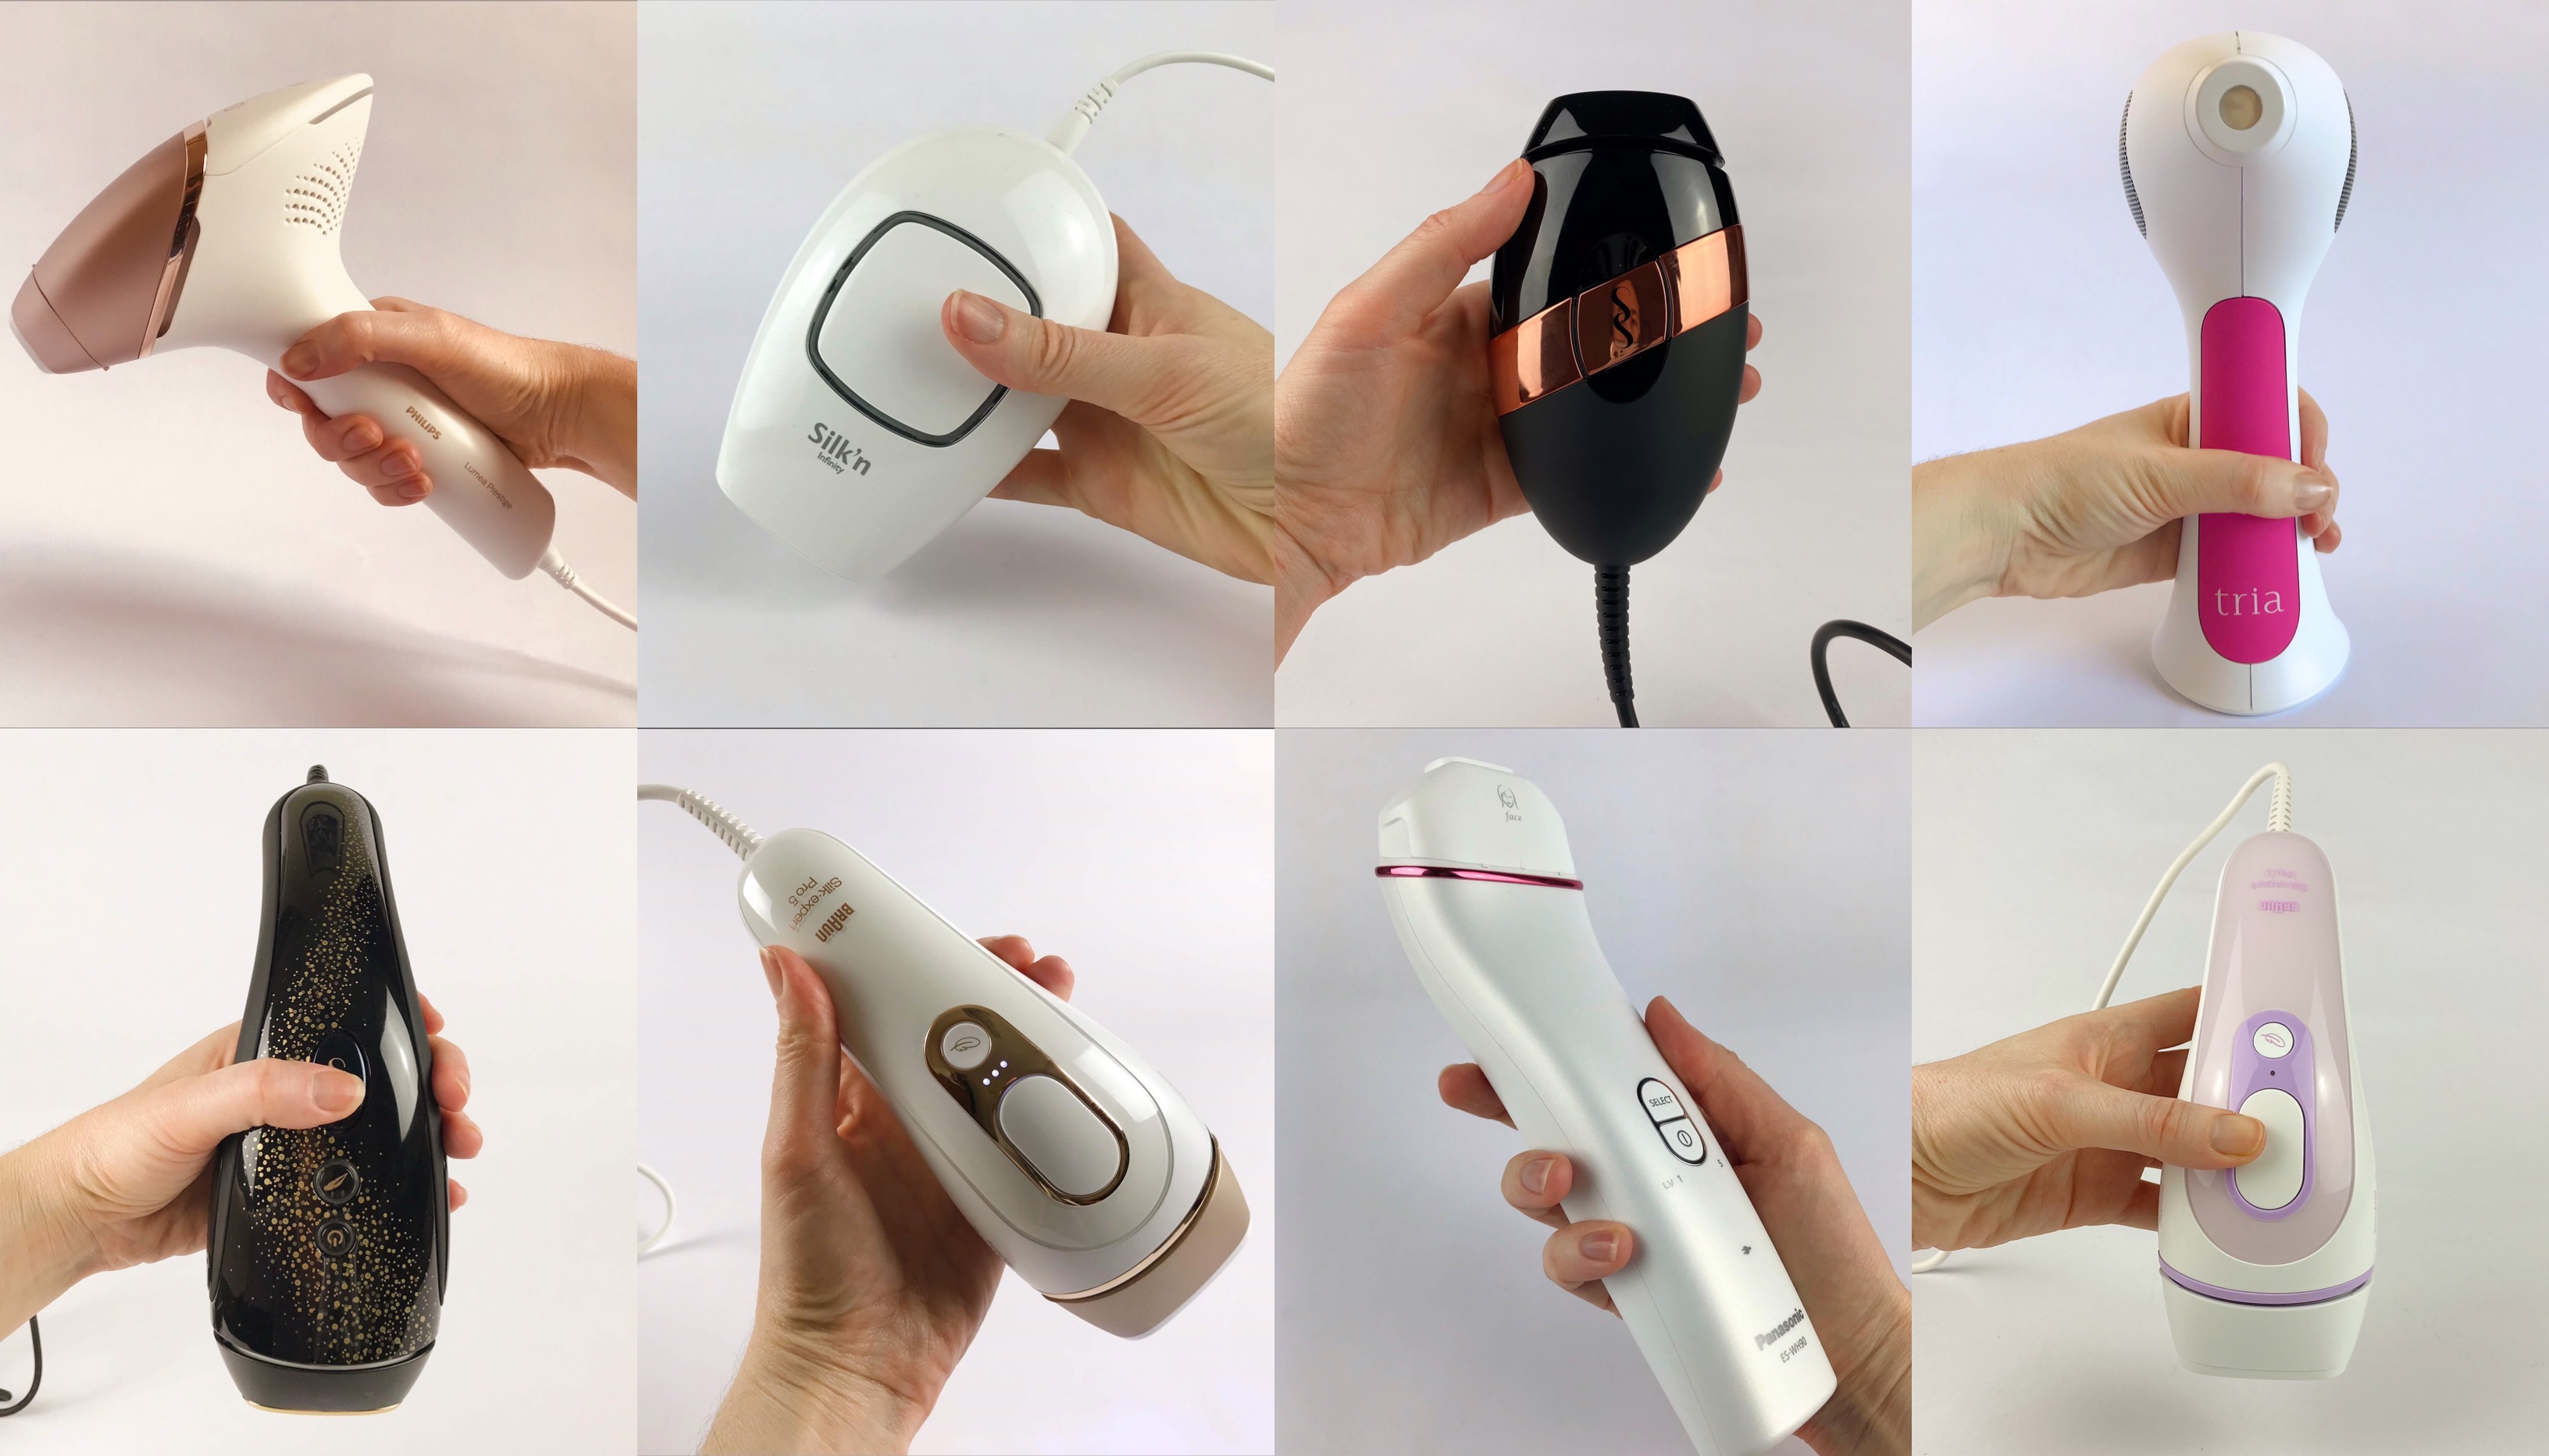 Find Your Ideal IPL & Laser Hair Removal Device With This 2020 Buyers Guide